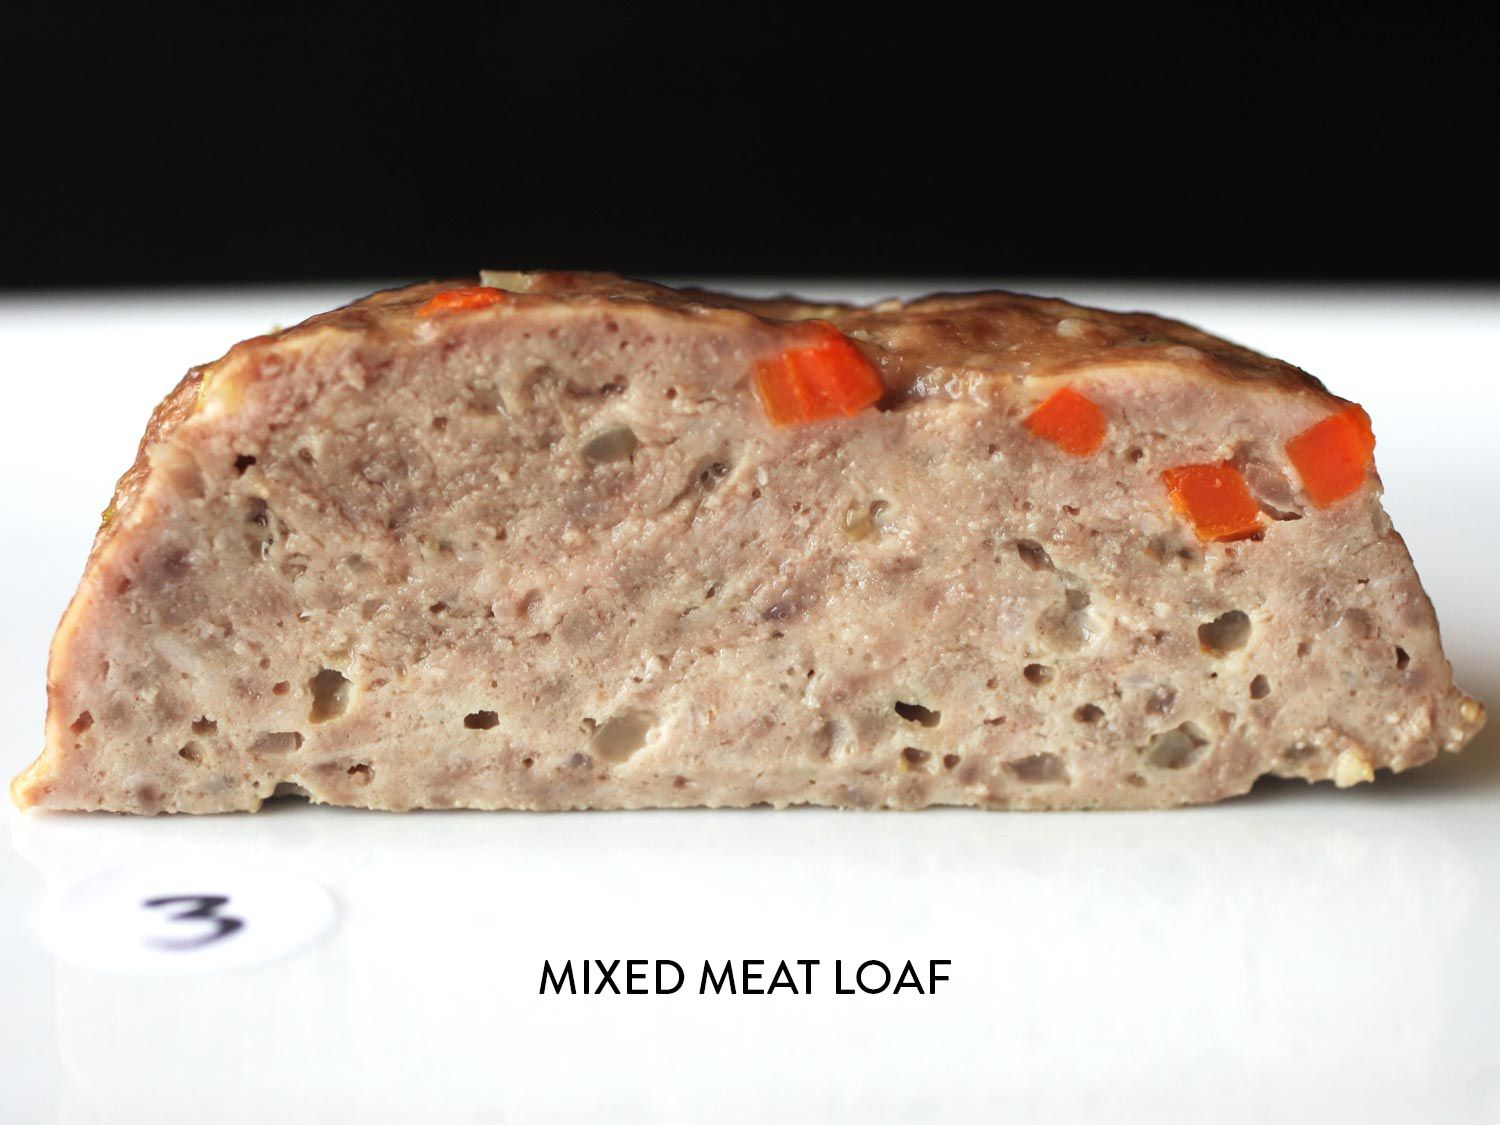 A cross-section meatloaf made with mixed meat